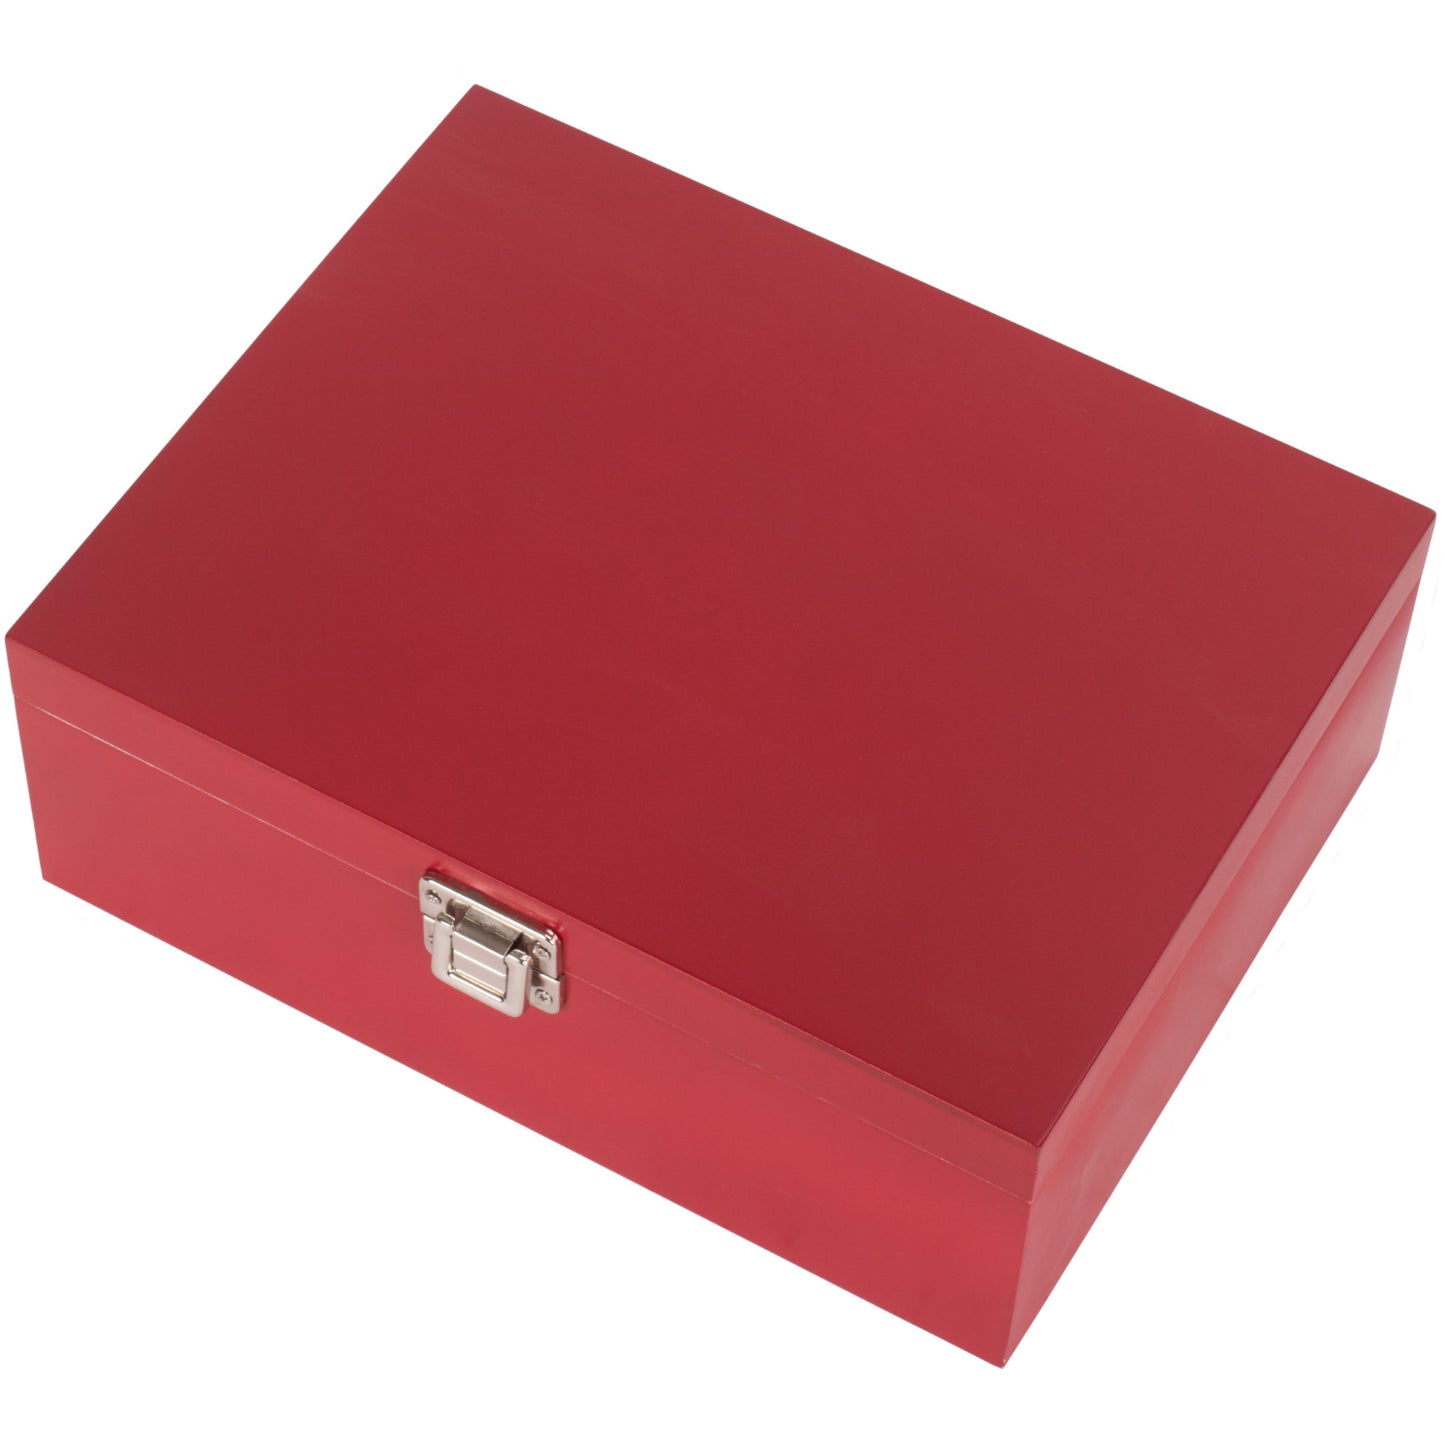 12 Inch Red Wooden Box